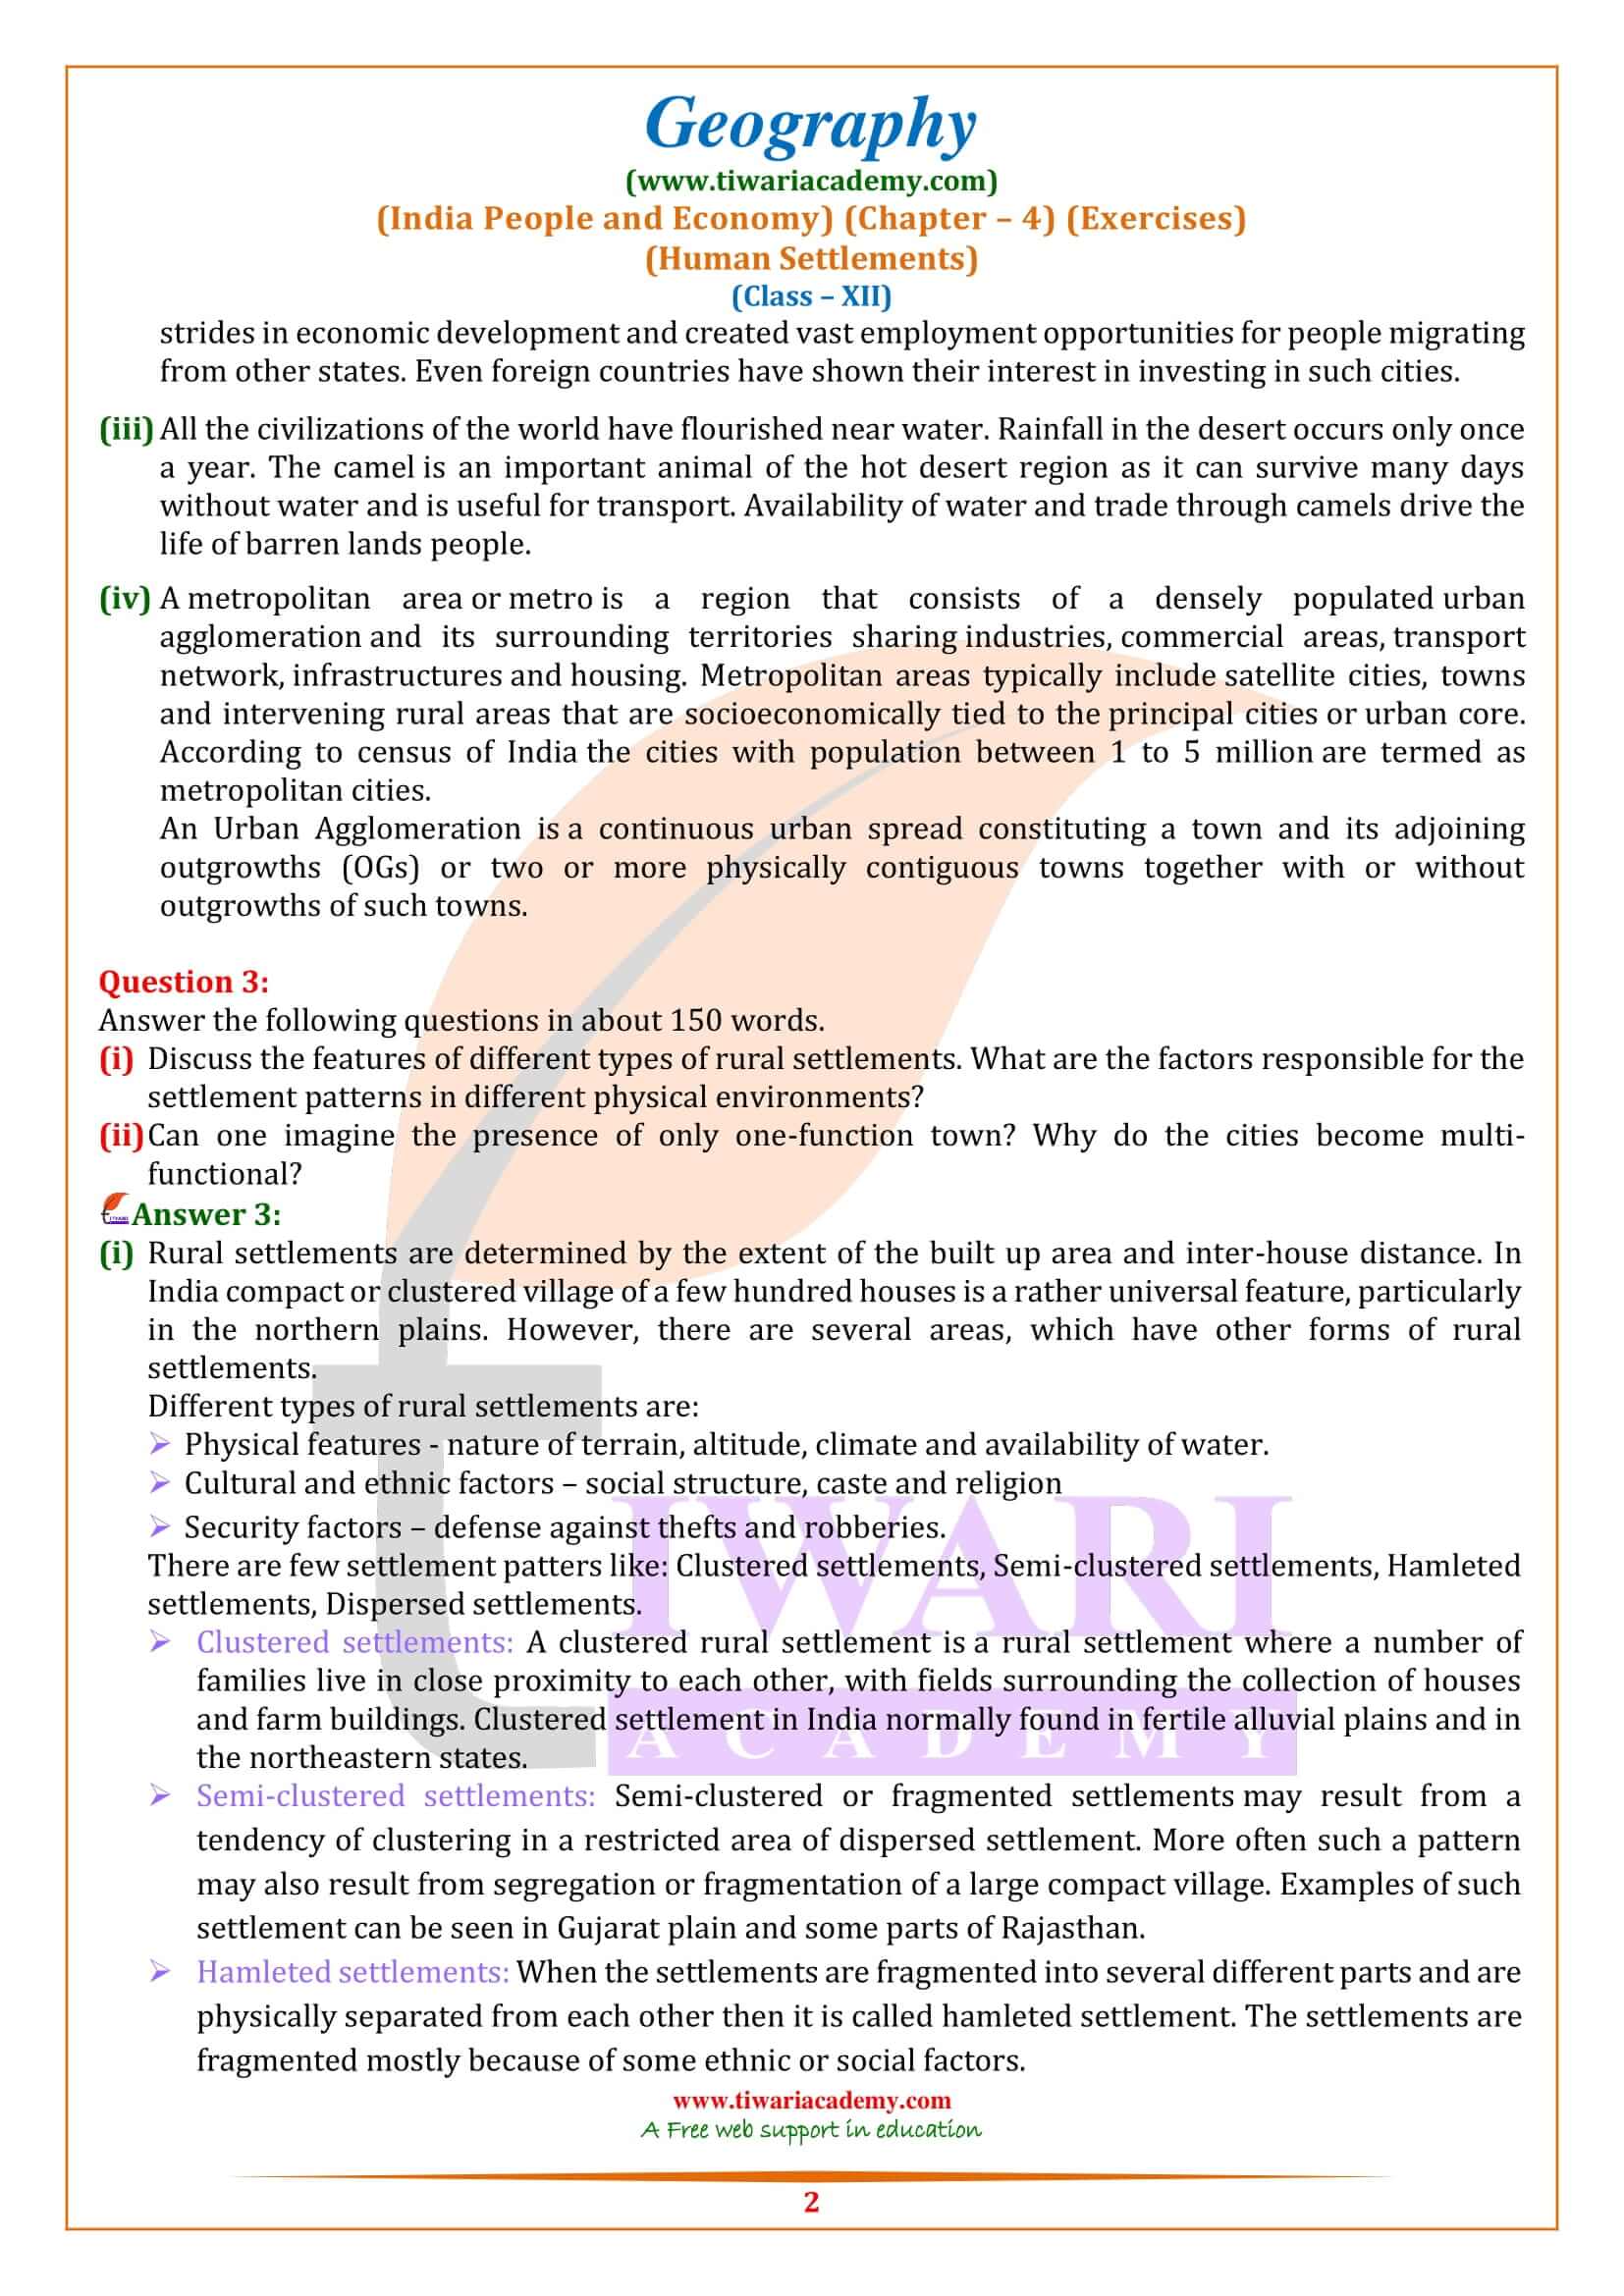 NCERT Solutions for Class 12 Geography Chapter 4 in English Medium